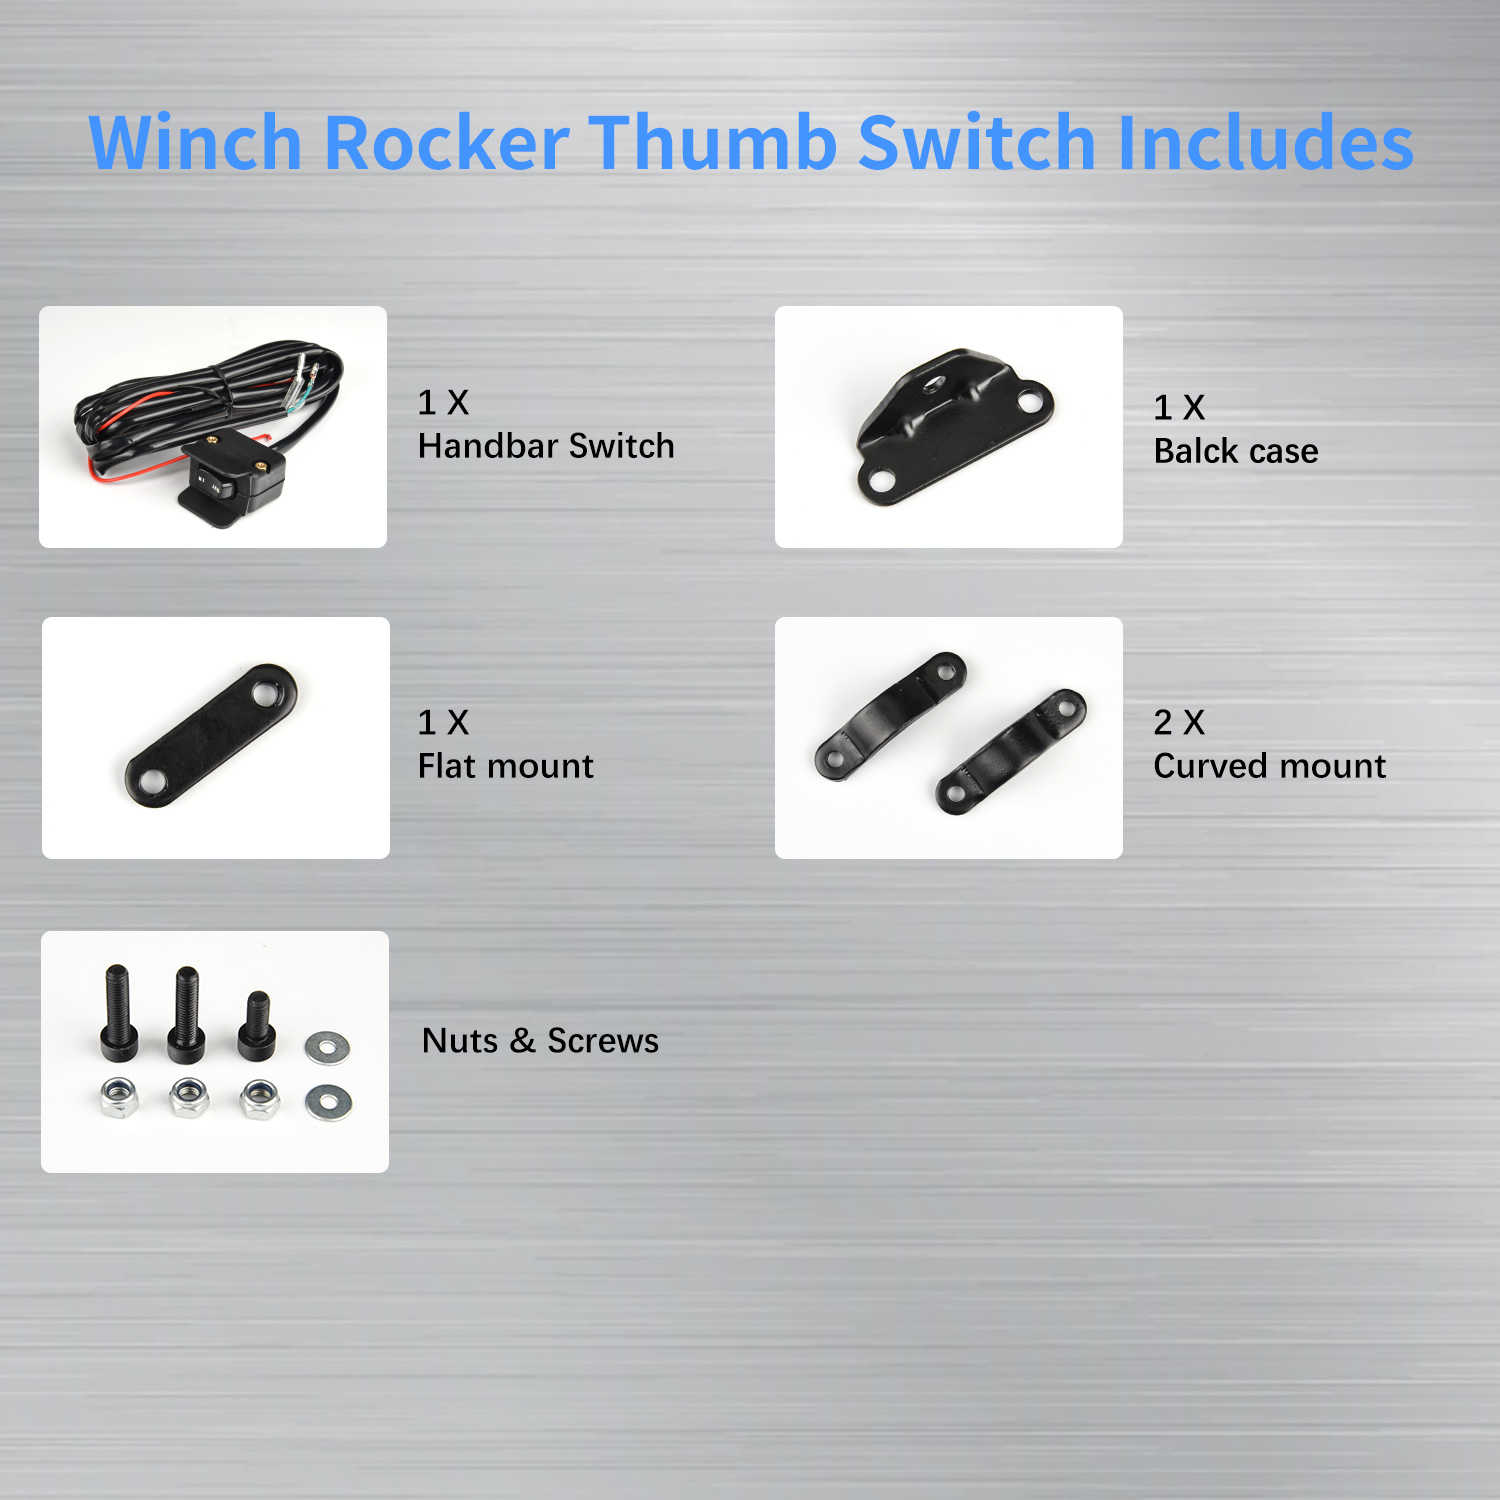 winch rocker thumb switch includes